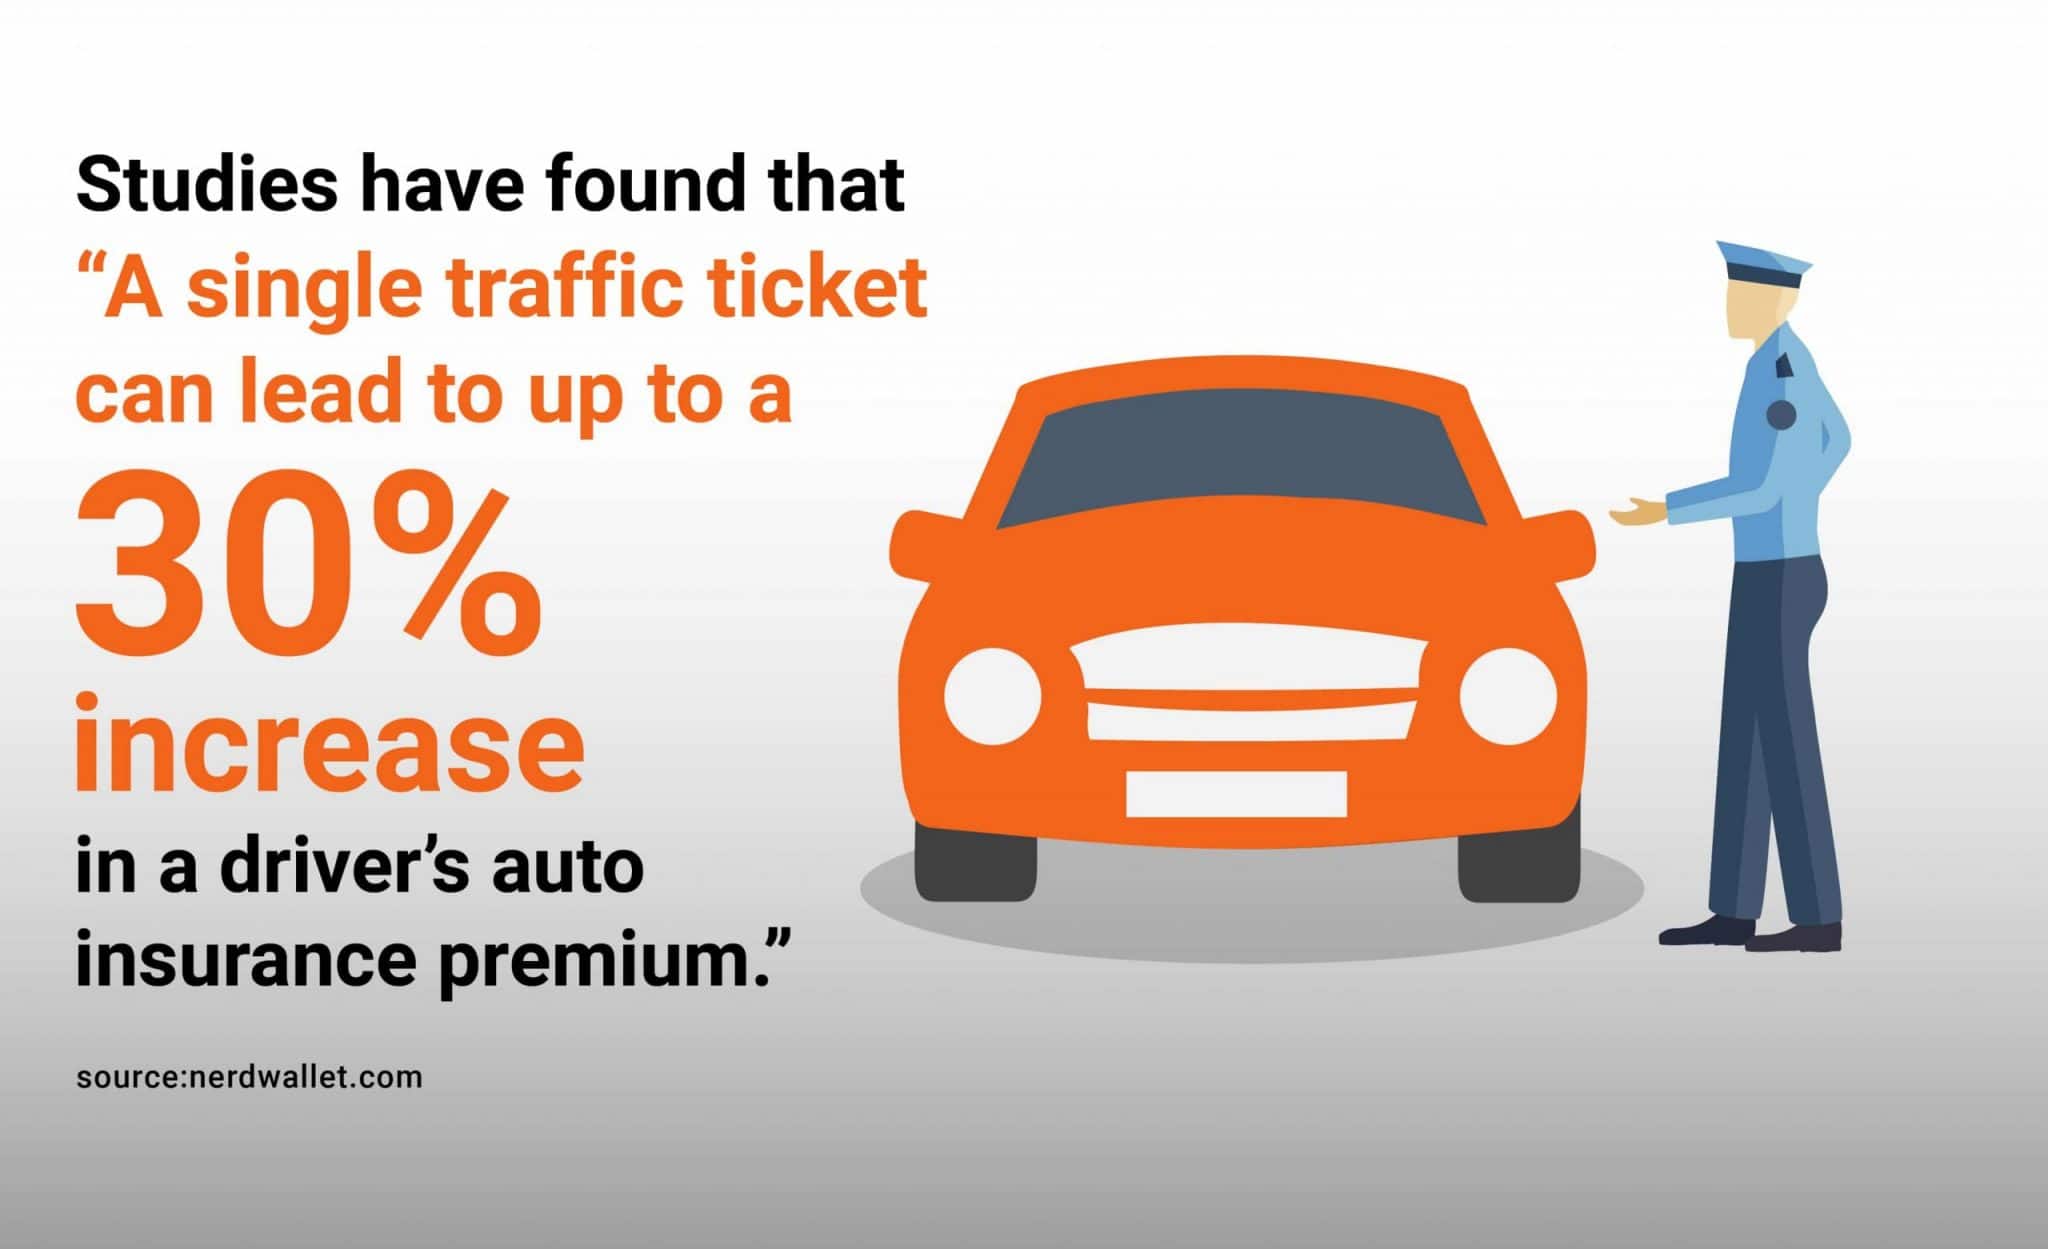 Studies have found that "A single traffic ticket can lead to up to a 30% increase in a driver's auto insurance premium"